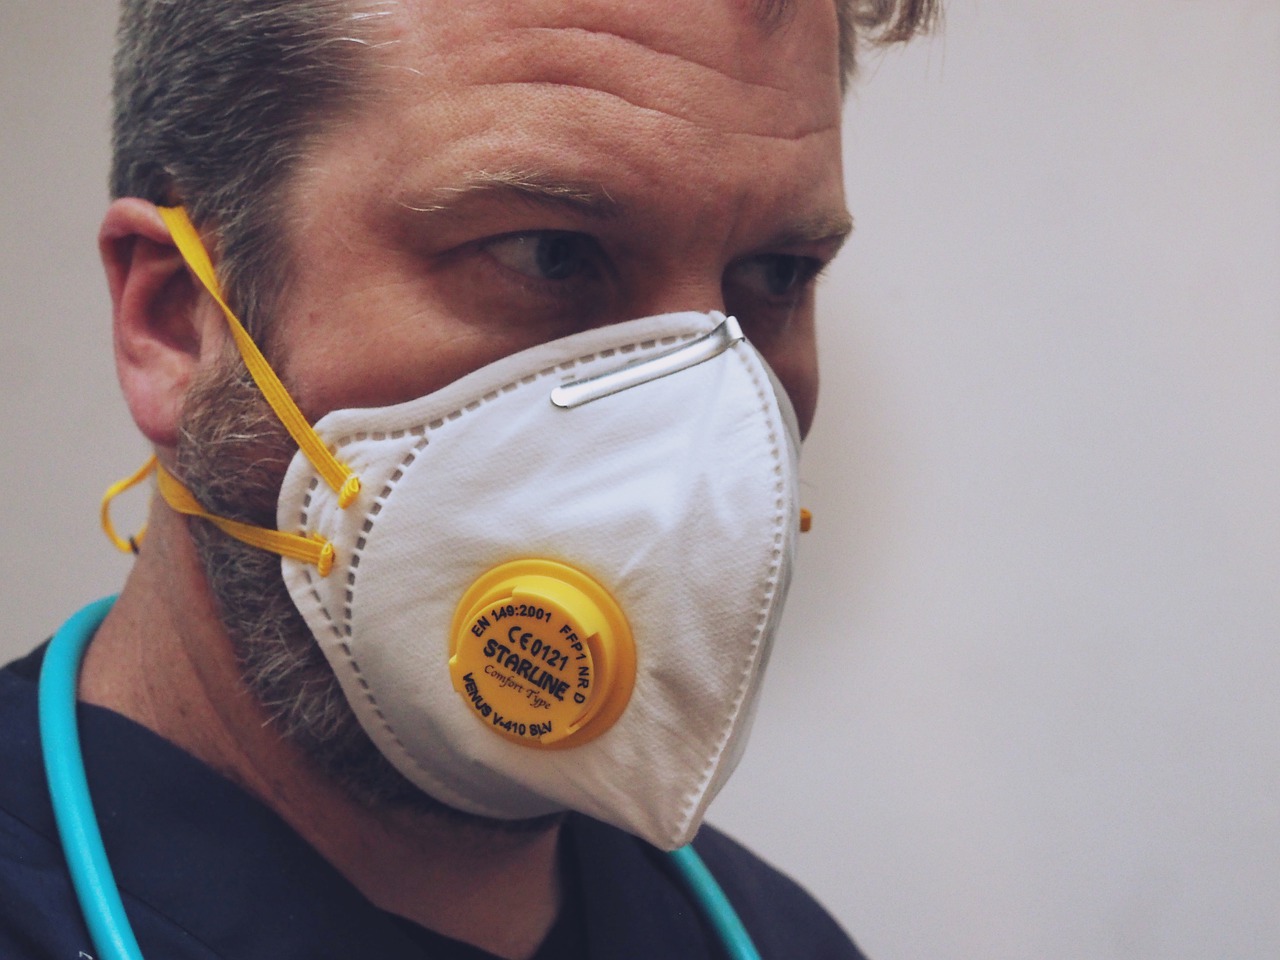 Man wearing valved face mask, with what looks like the top part of a stethoscope around his neck.